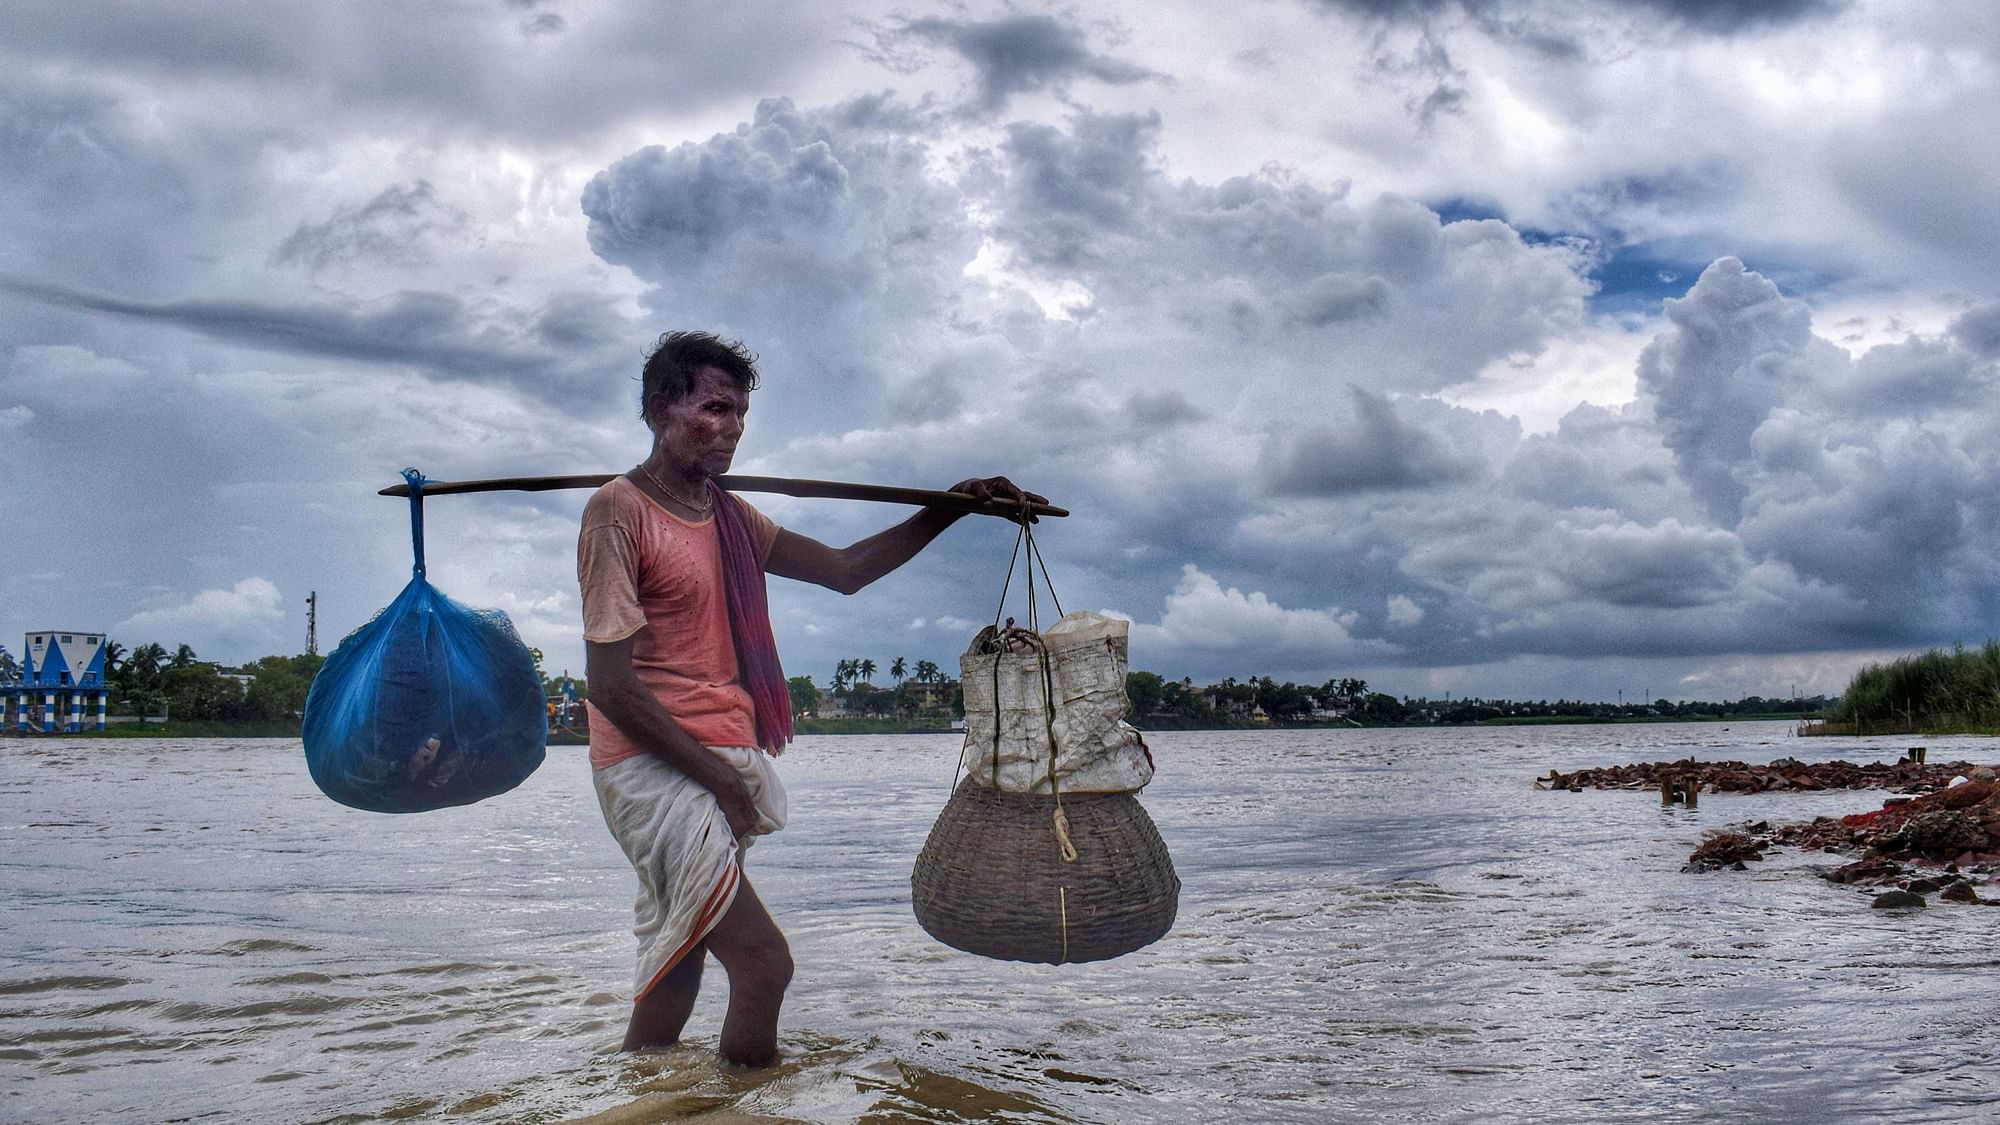 A man carrying his belongings walks at the banks of Hooghly river in the backdrop of dark clouds looming in the sky in Nadia district of West Bengal on Wednesday, 8 July.